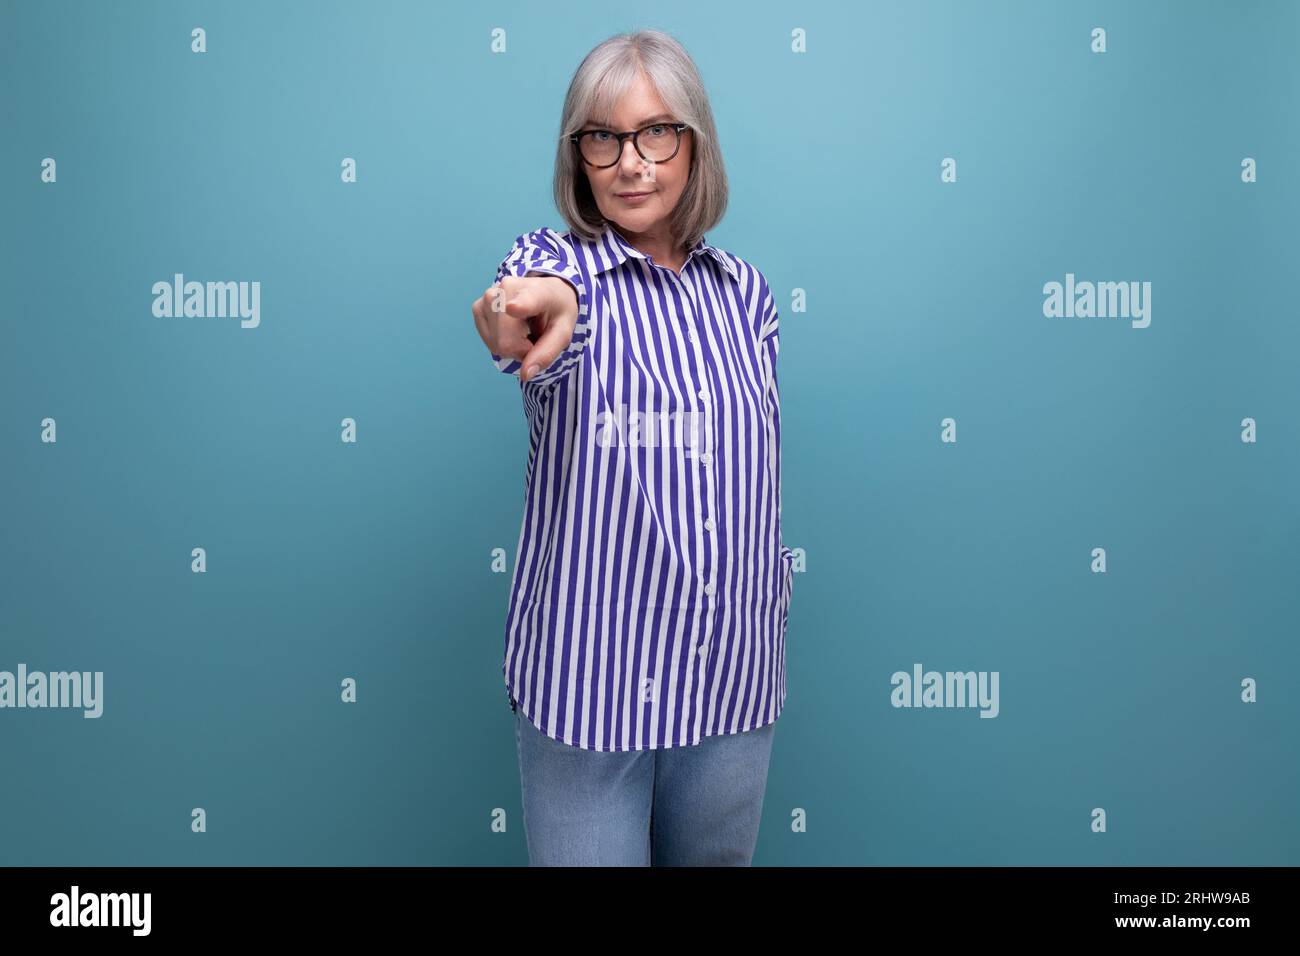 smart brilliant middle-aged lady with gray hair on a bright studio background with copy space Stock Photo